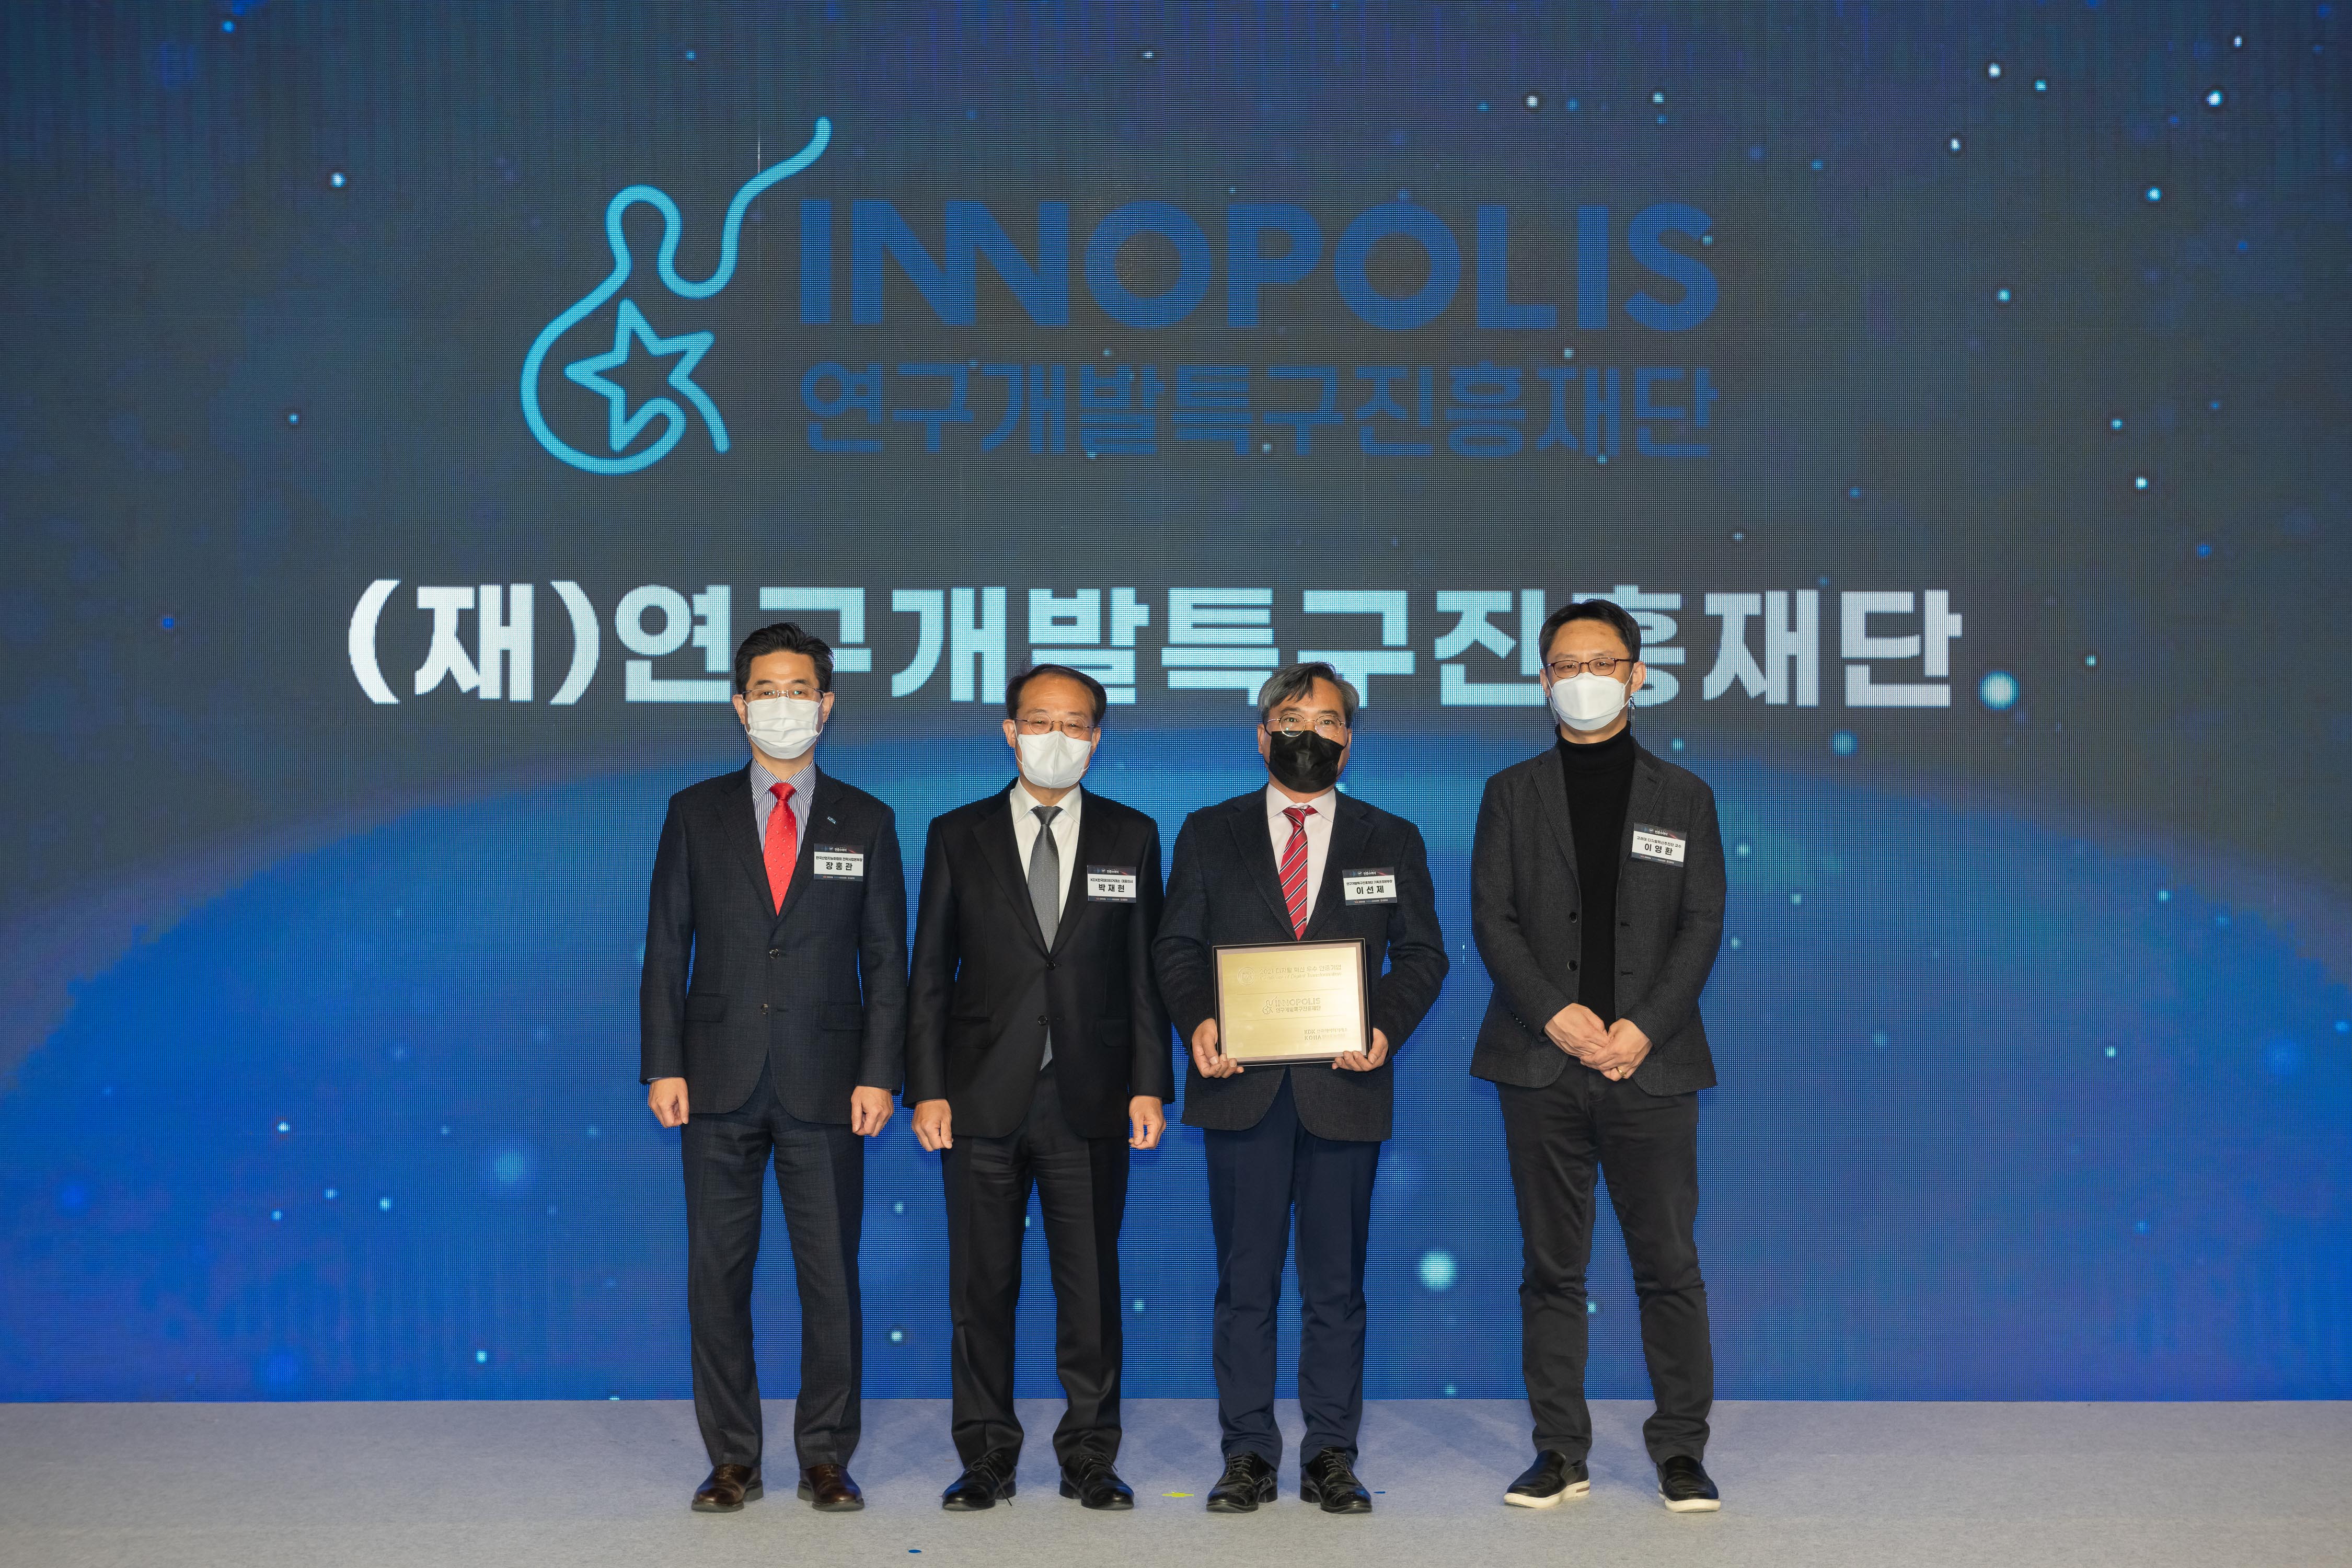 INNOPOLIS, selected as the first digital innovation certification body as a quasi-governmental institution